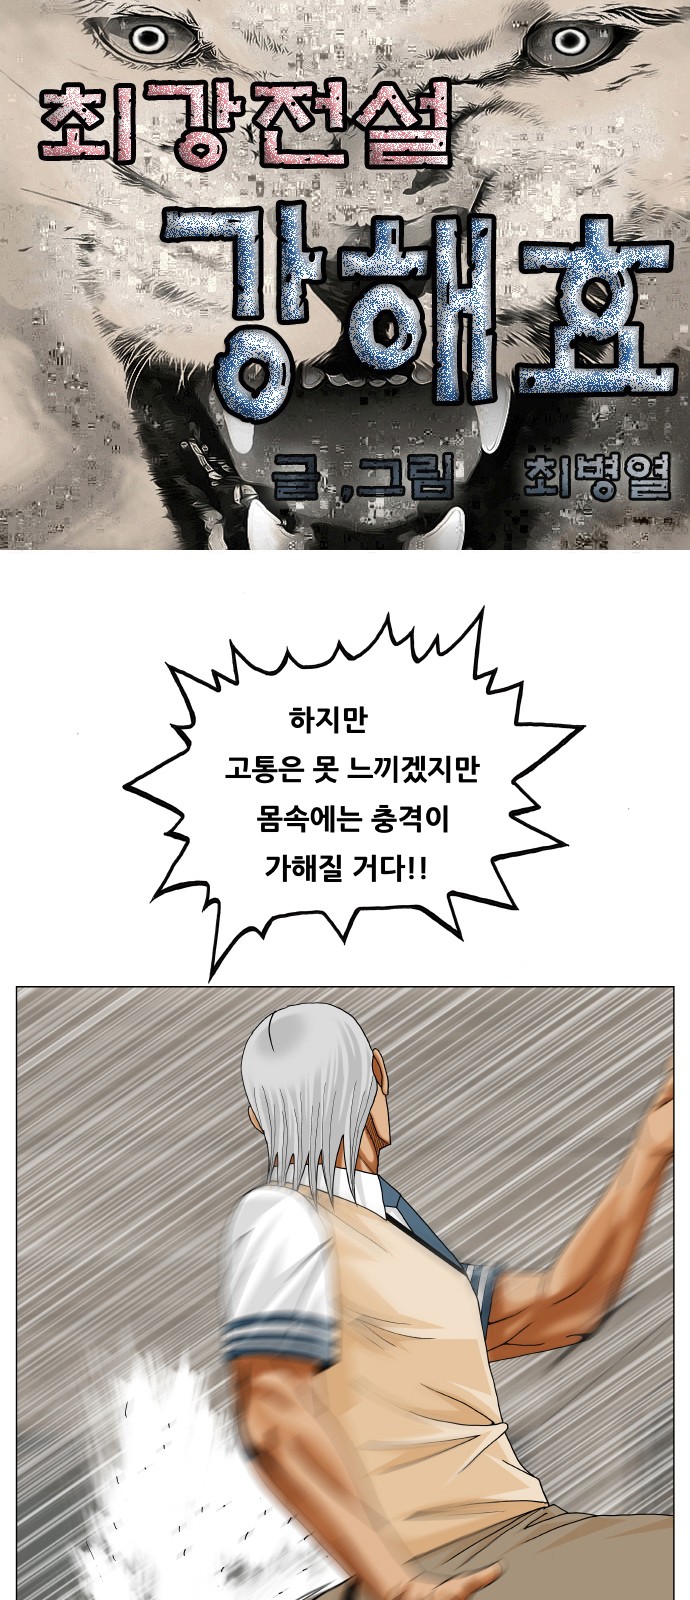 Ultimate Legend - Kang Hae Hyo - Chapter 422 - Page 1